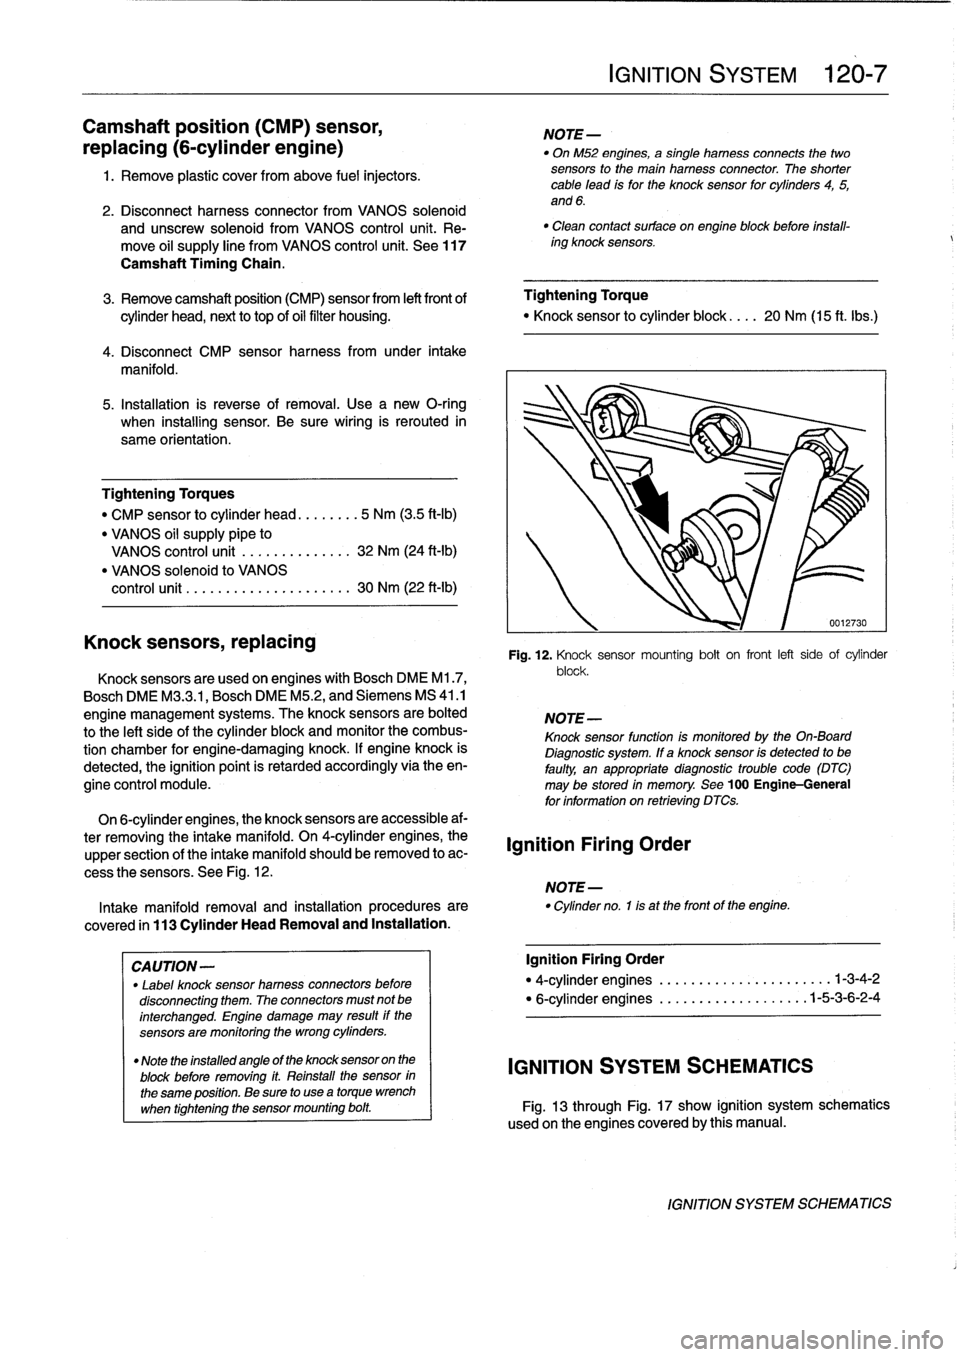 BMW 323i 1995 E36 Owners Guide 
Camshaft
position
(CMP)
sensor,

replacing
(6-cylinder
engine)

1
.
Remove
plastic
cover
from
above
fuel
injectors
.

2
.
Disconnect
harness
connector
from
VANOS
solenoid

and
unscrew
solenoid
from
V